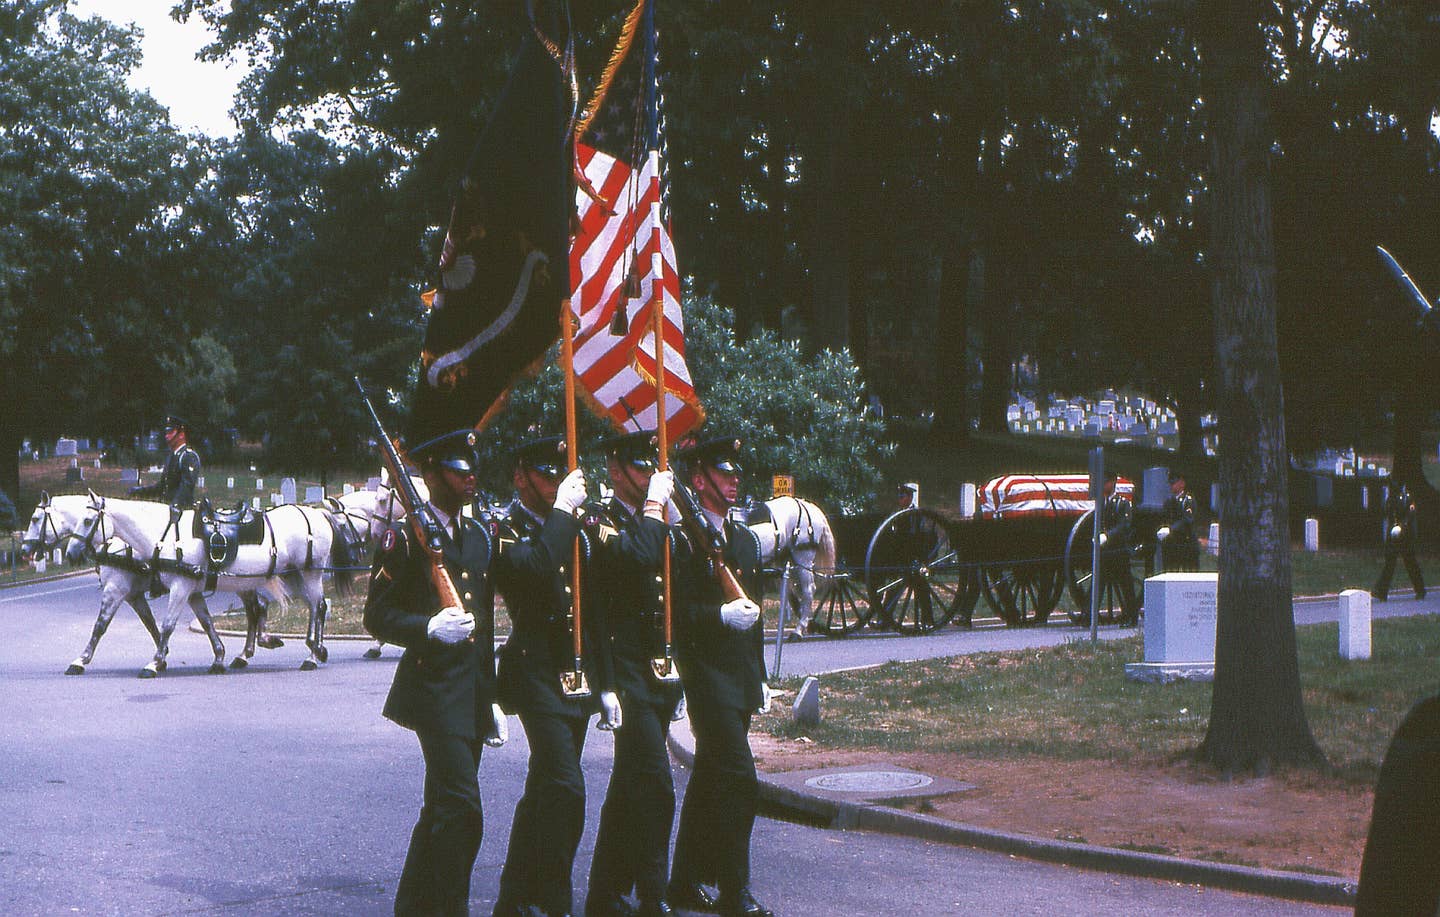 A funeral procession at Arlington National Cemetery. (Wikimedia Commons photo by EditorASC)